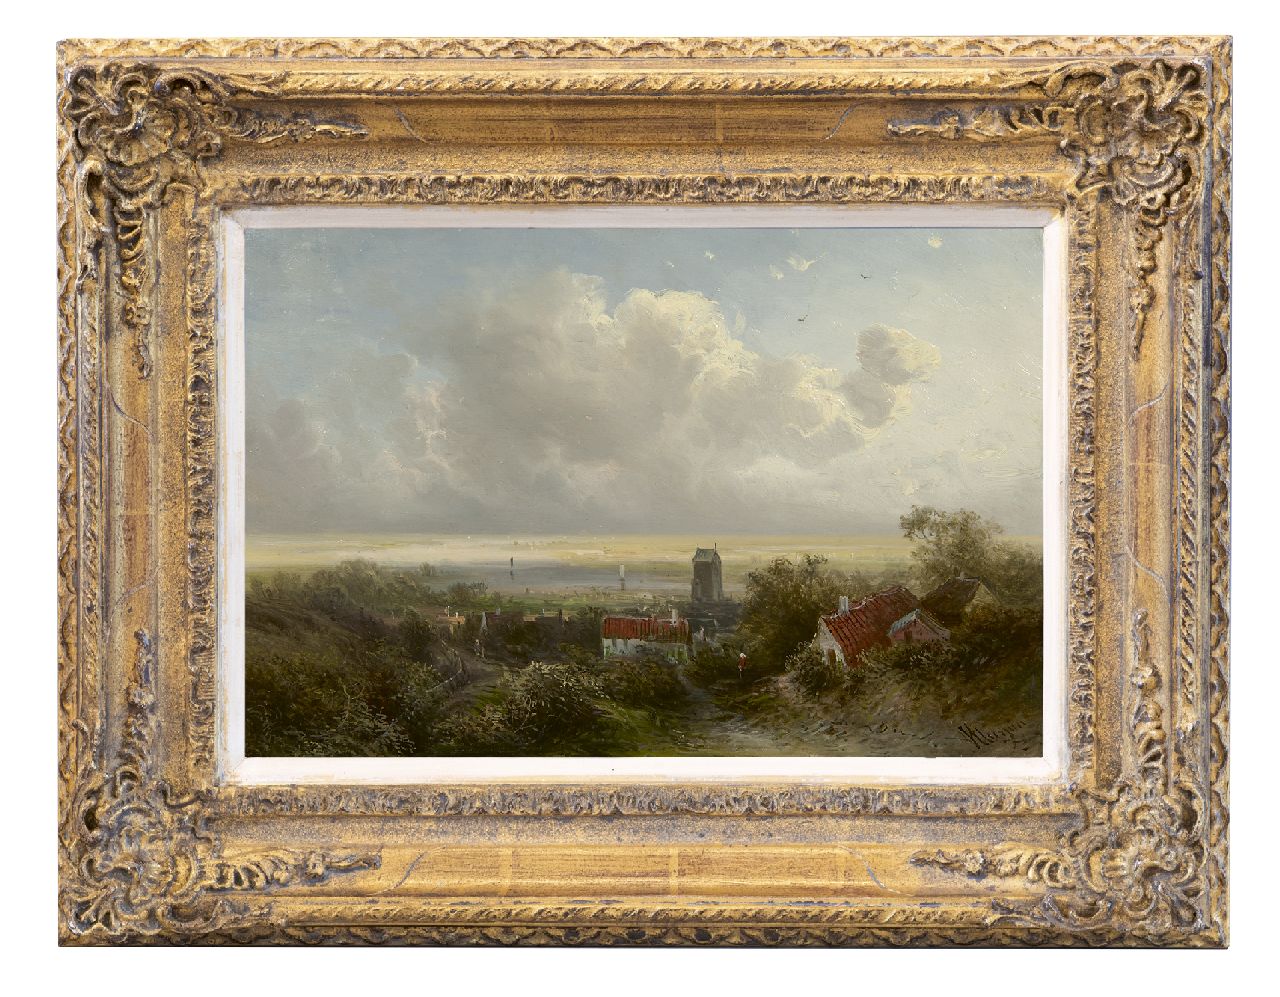 Kluyver P.L.F.  | 'Pieter' Lodewijk Francisco Kluyver | Paintings offered for sale | A view on a river valley, oil on panel 23.7 x 36.0 cm, signed l.r.